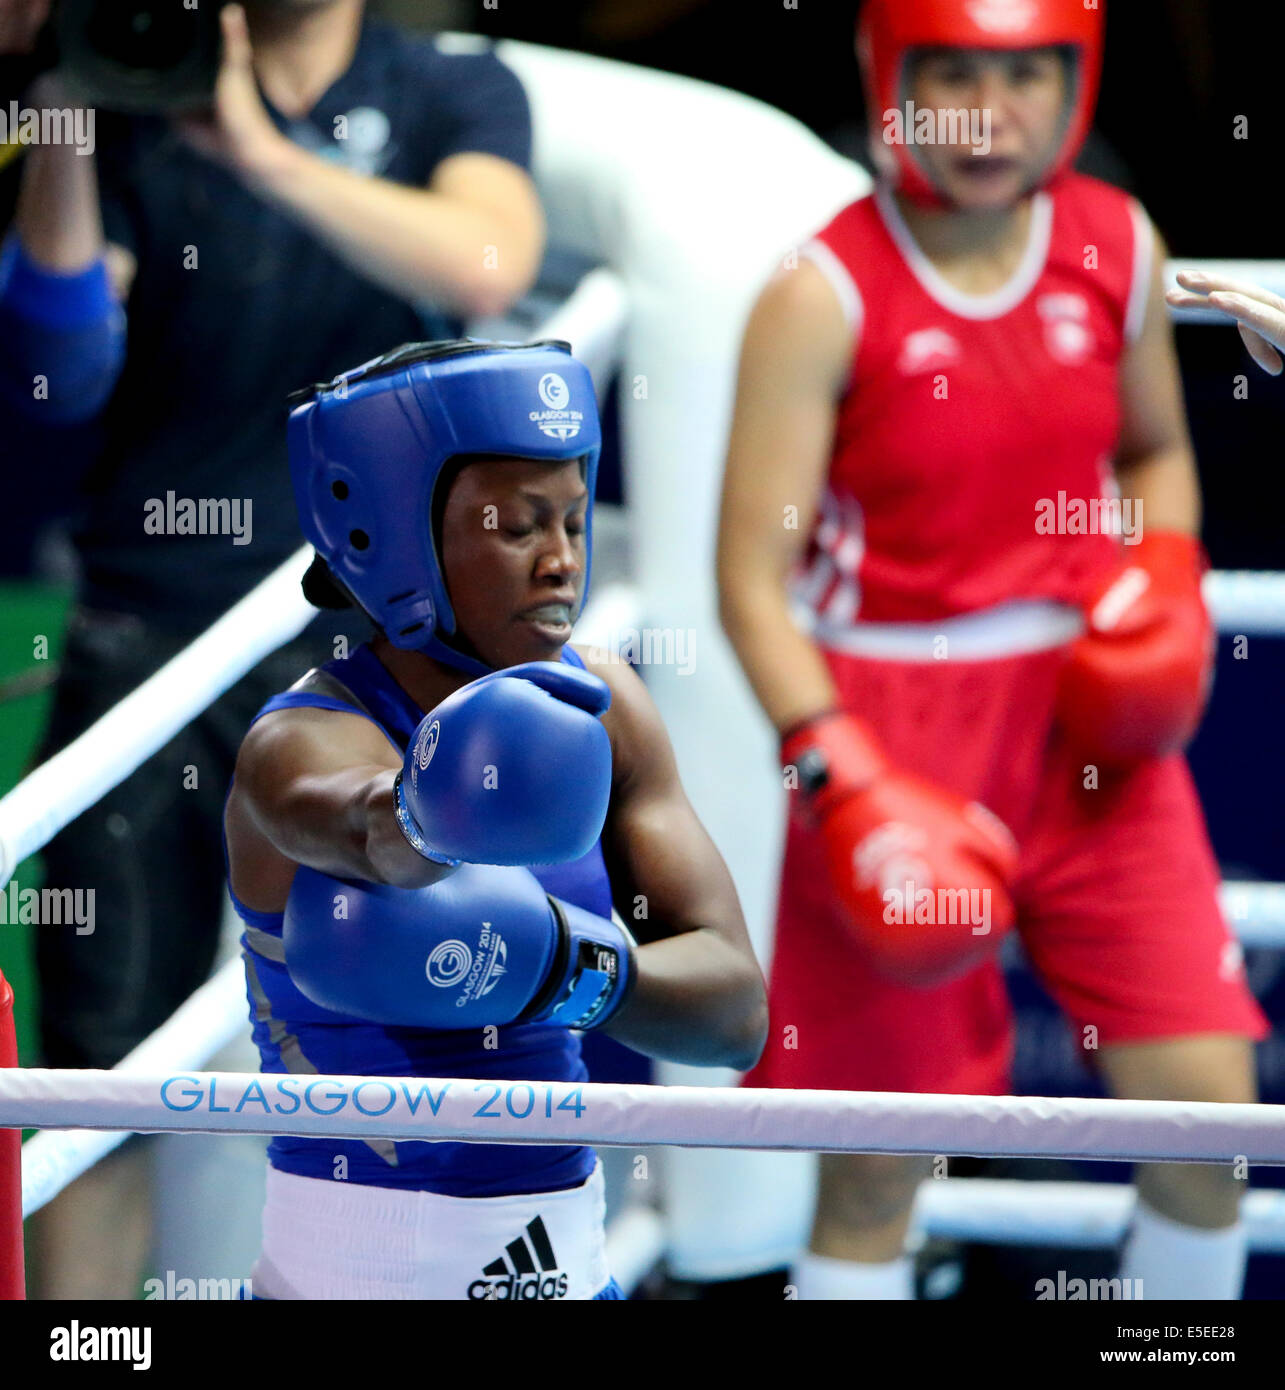 SECC Glasgow Scotland 29 Jul 2014. Commonwealth Games day 6. Men's and Women's boxing rounds. Laishram Devi IND beats Kehinde Obarah NGR in Women's light final 16 round after bout was stopped when Obarah suffers a shoulder injury. Credit:  ALAN OLIVER/Alamy Live News Stock Photo